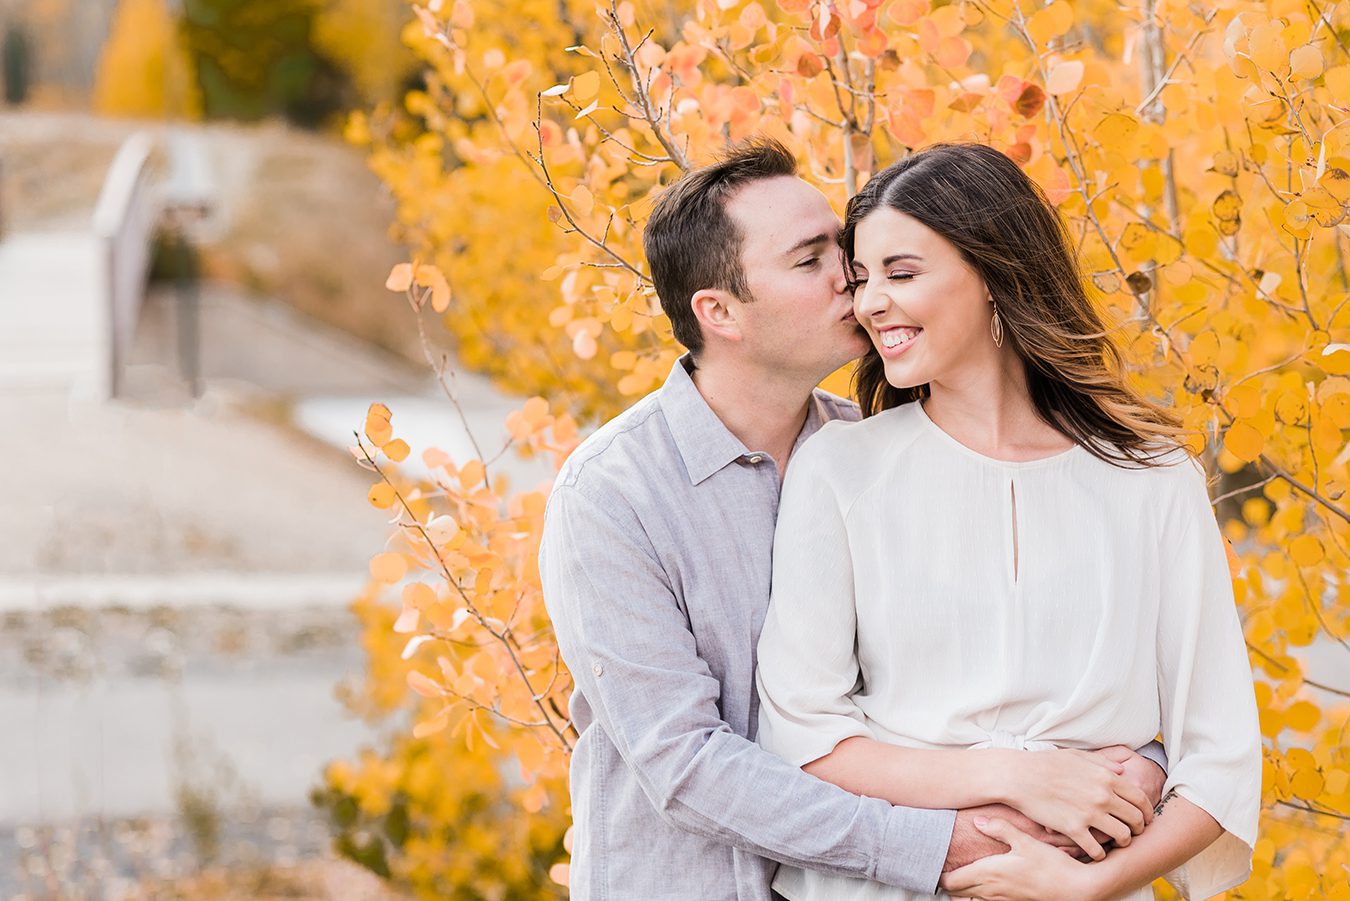 Molly and Connor's Color Sunday engagement session on the Mesa | amanda.matilda.photography